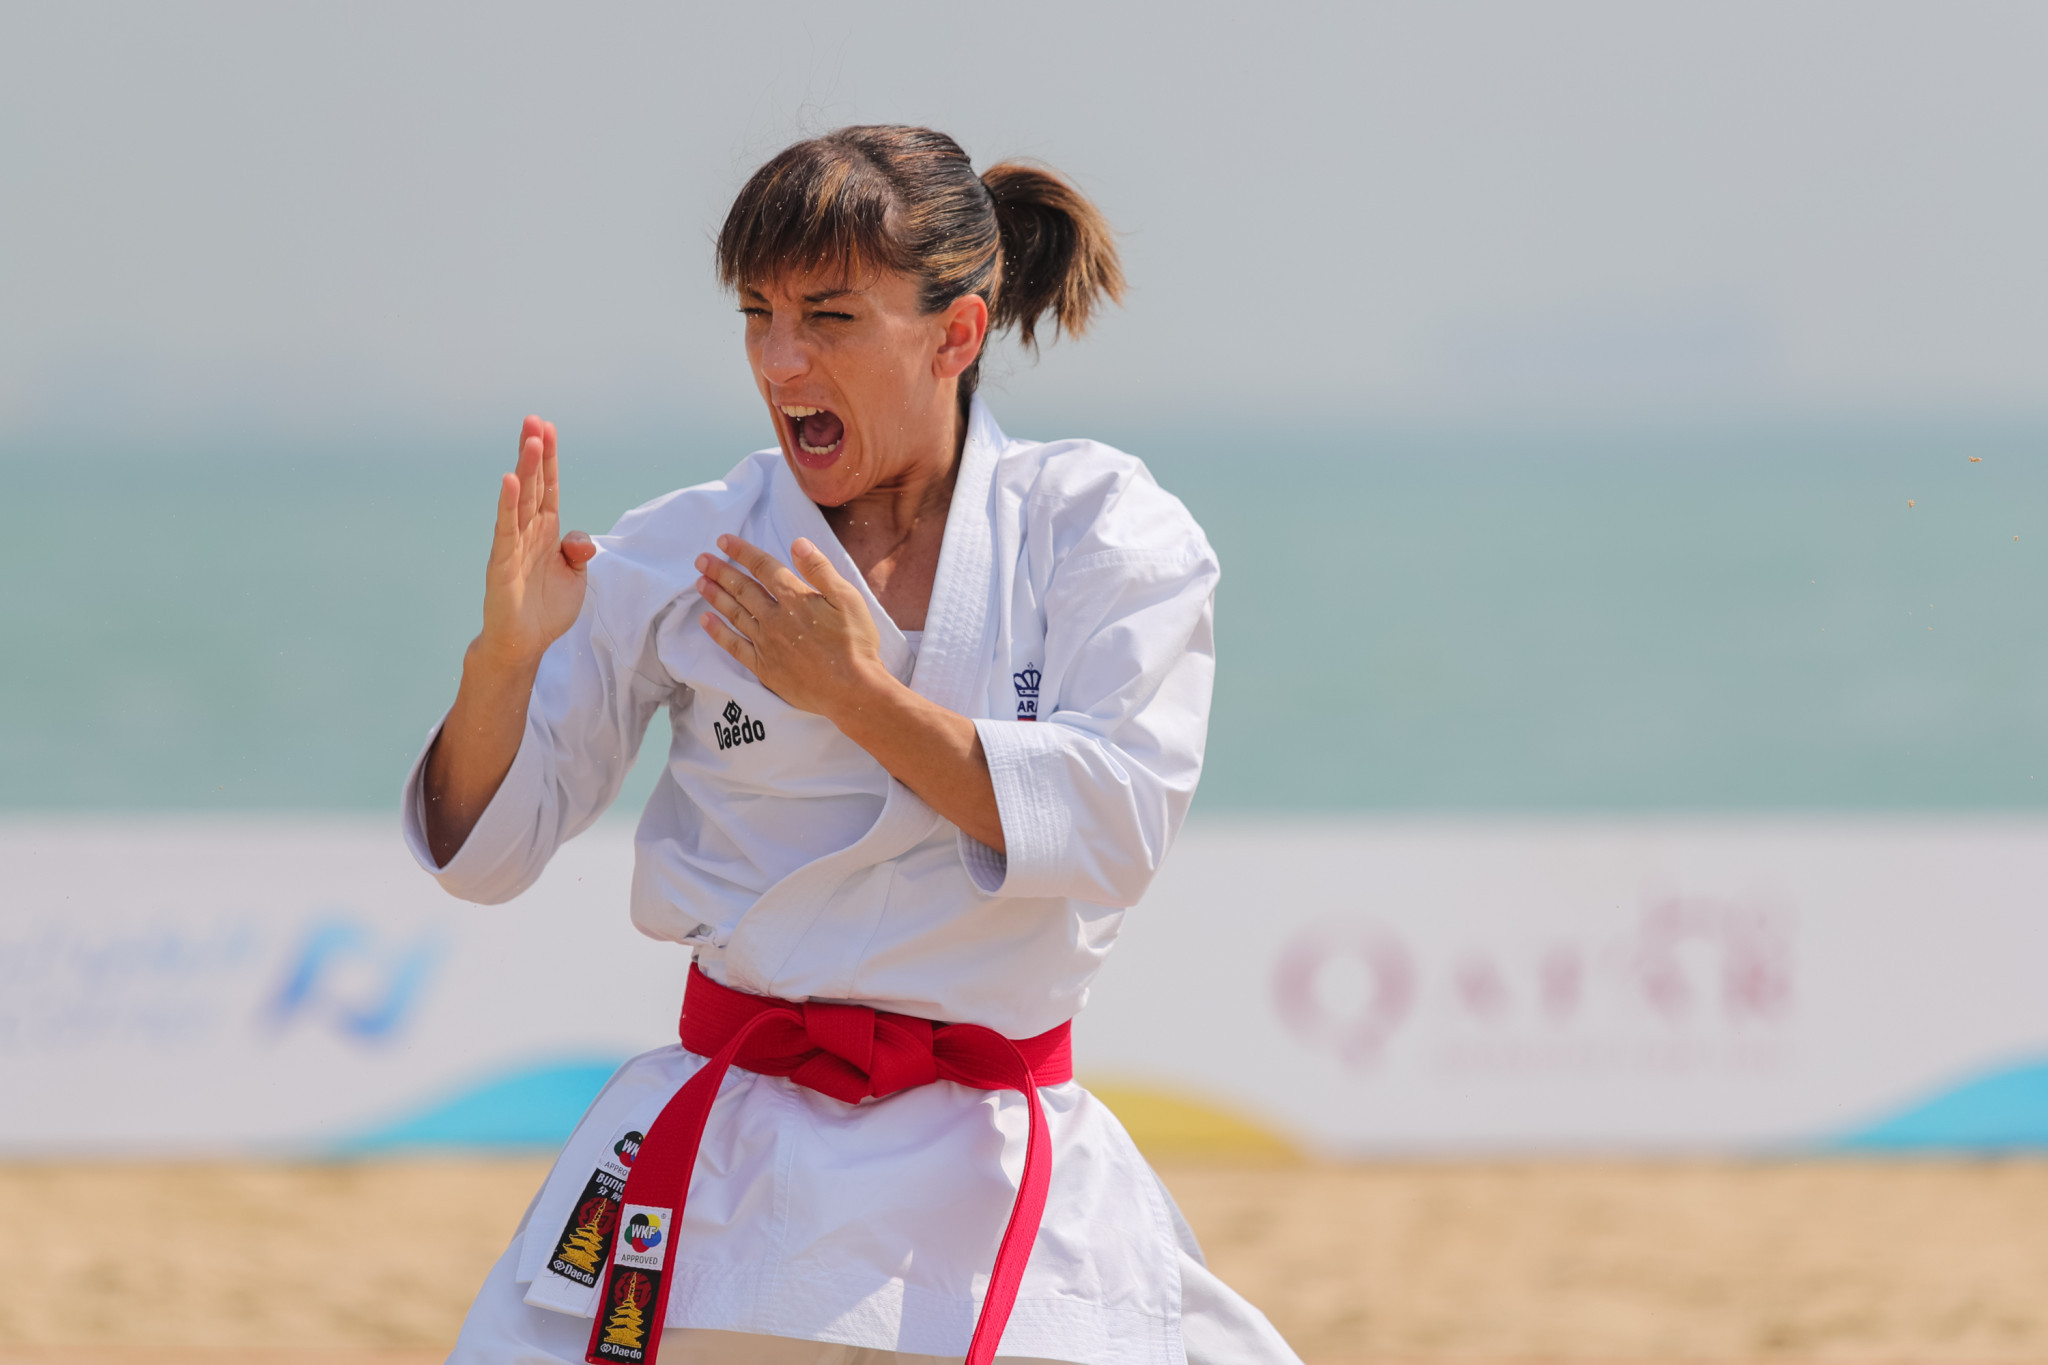 Kata karate competition was held for the first time on sand as action began ©ANOC World Beach Games